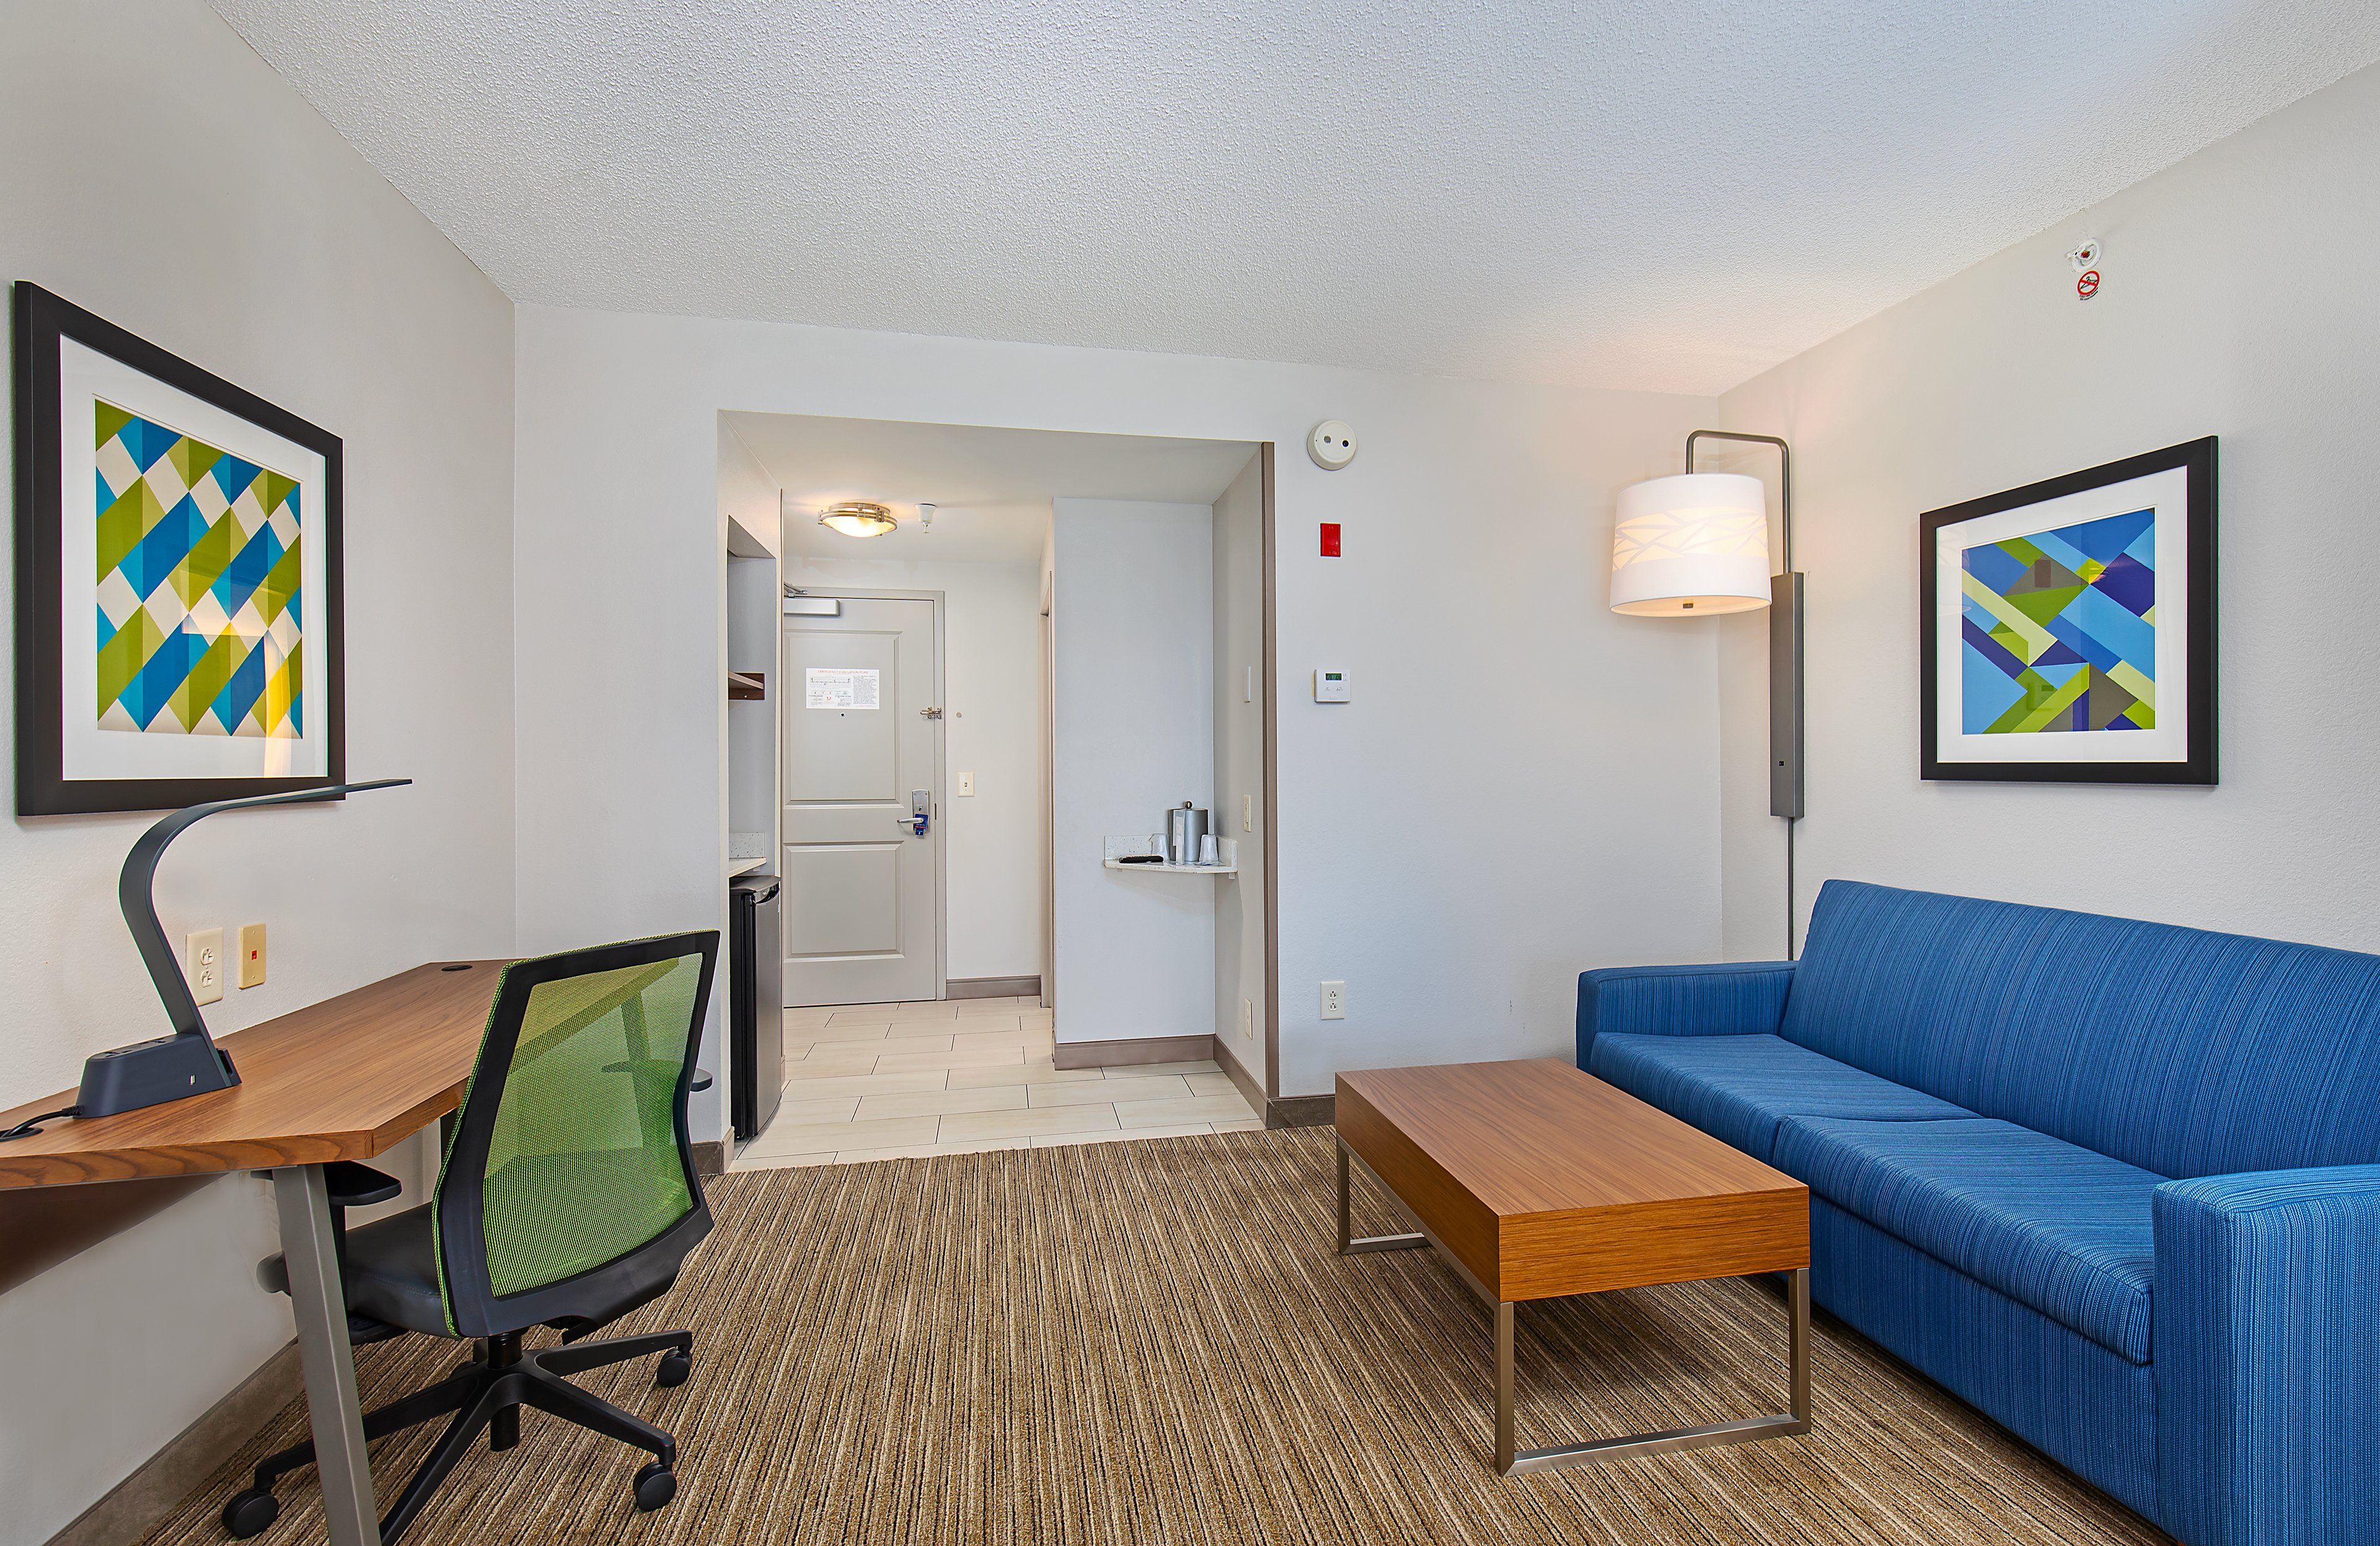 All of our Suites have pull out sleeper sofas!